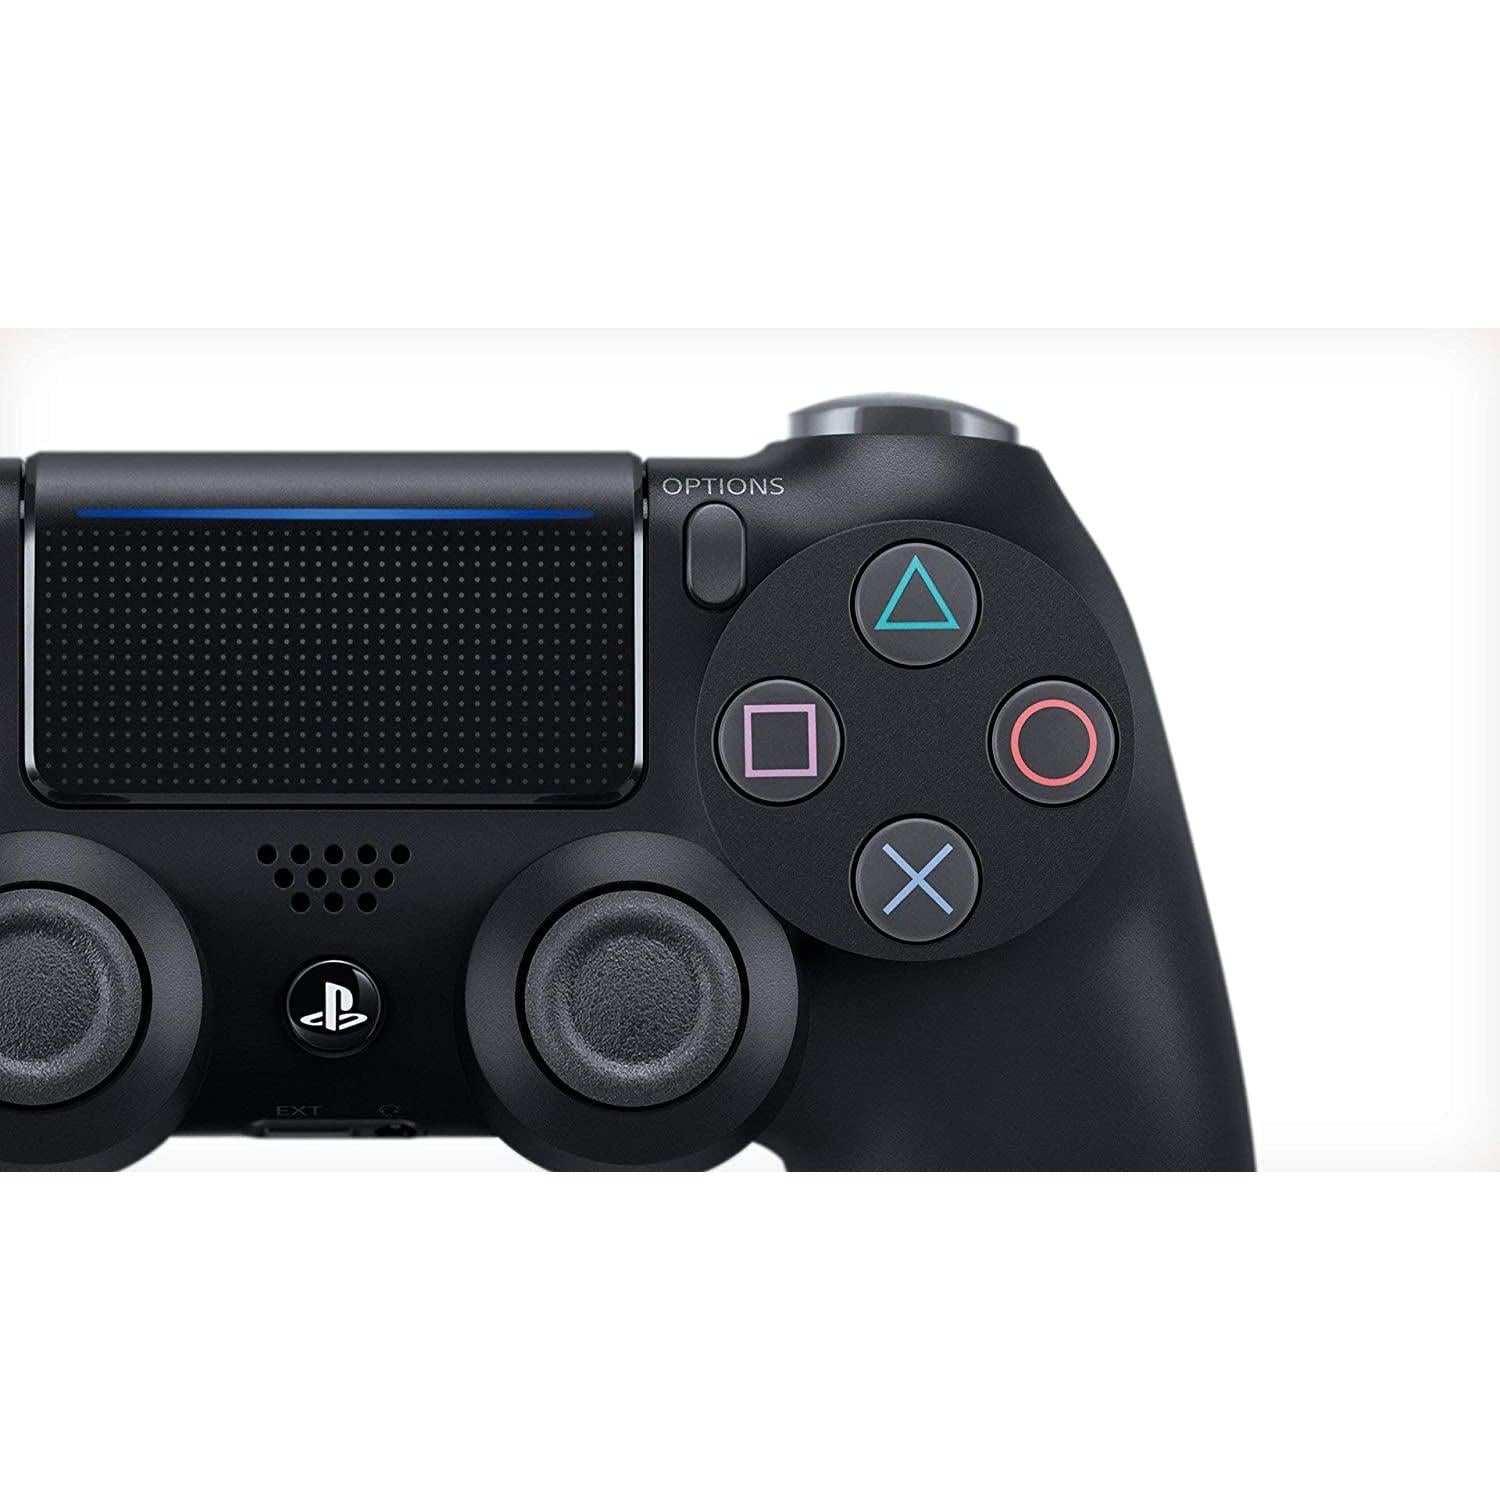 Sony-Official-PlayStation-DualShock-4-Controller-Black-5_62cd96fa-21b1-4050-a3a3-d470c39c31c7